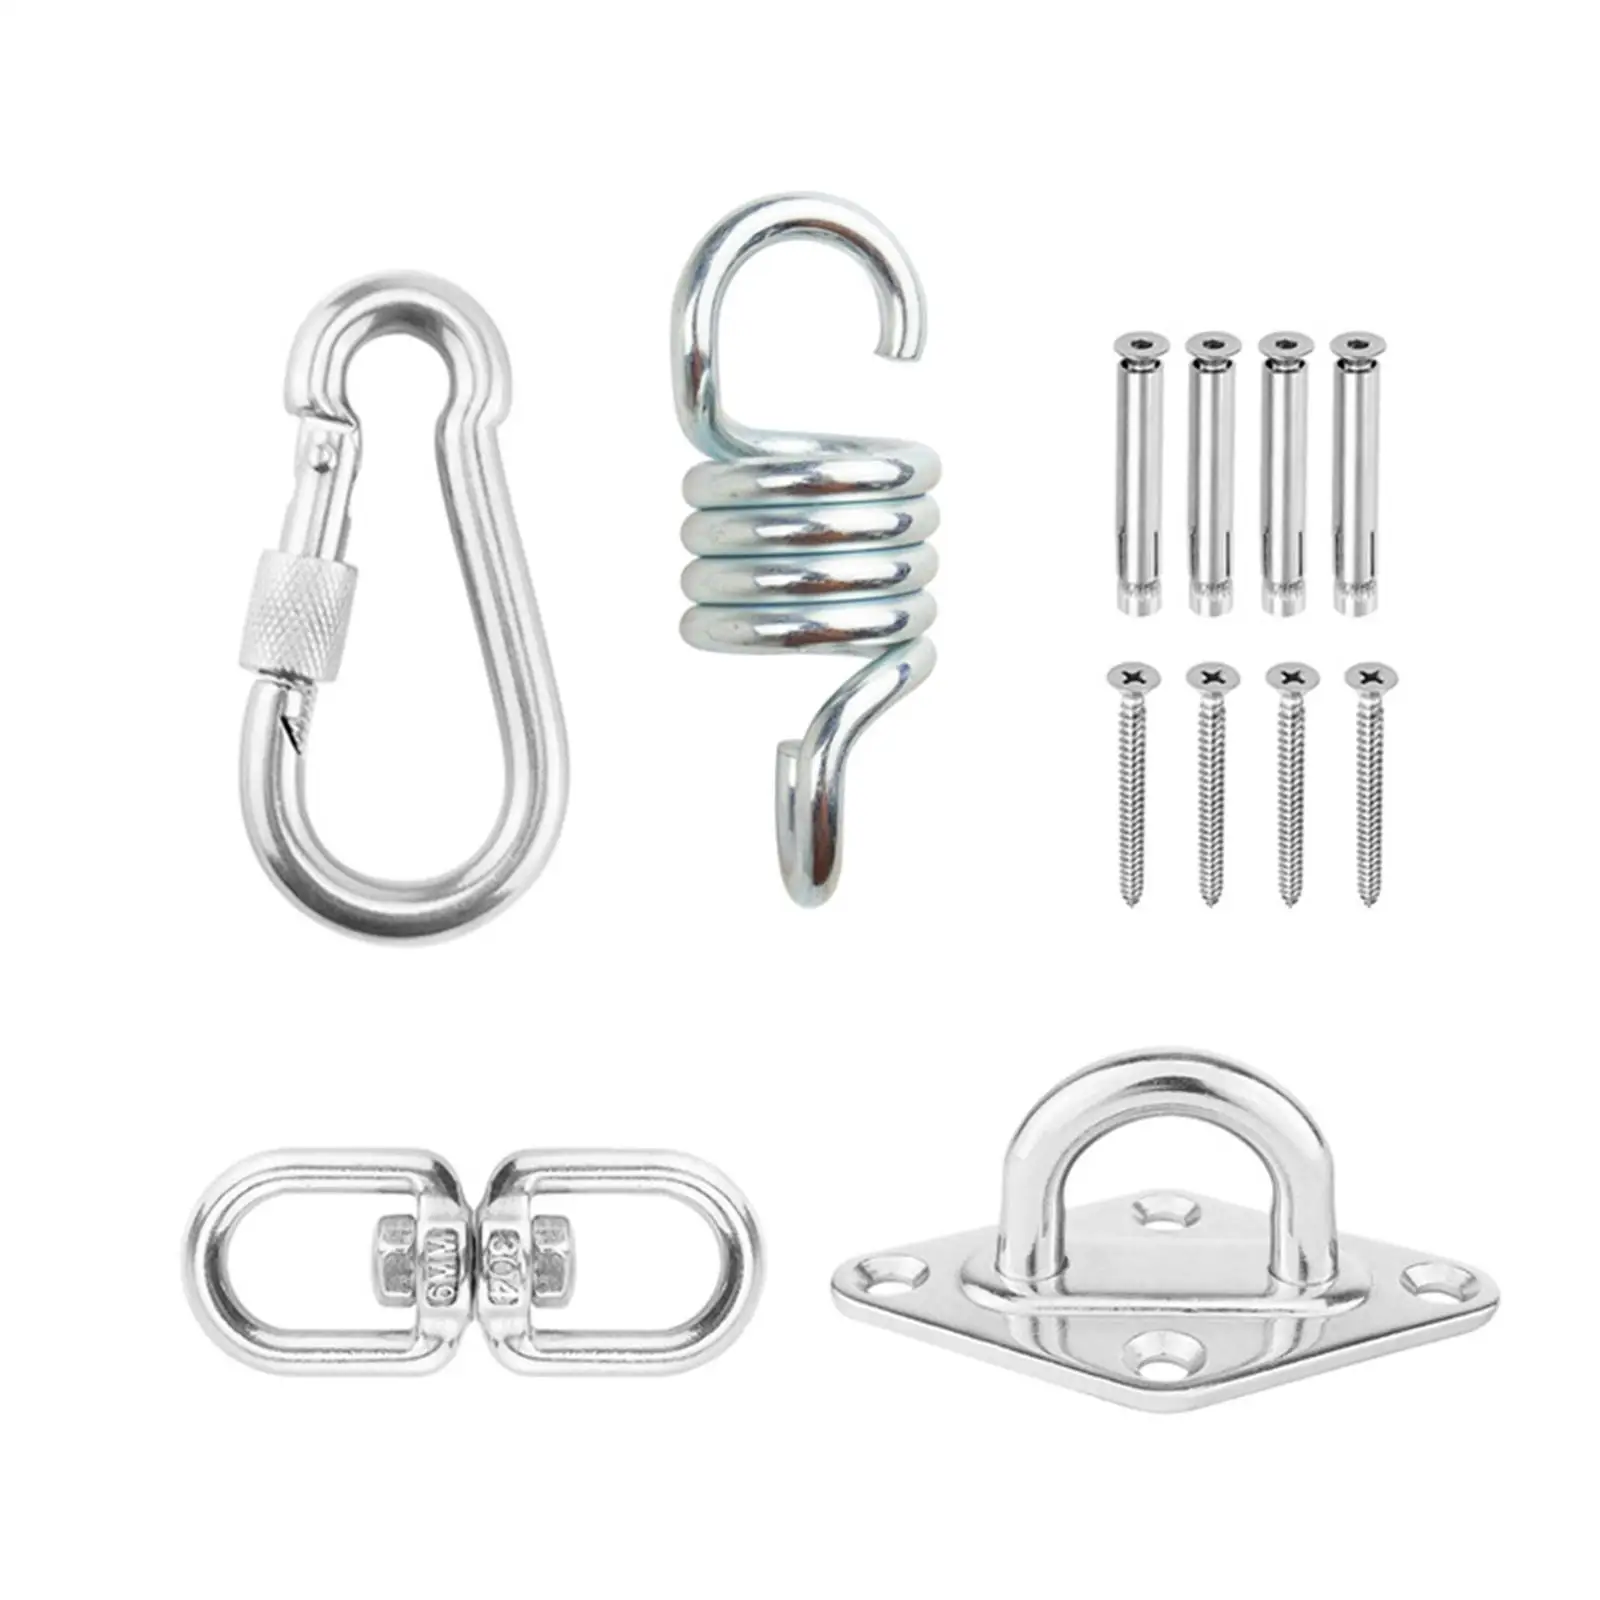 Hammock Chair Hanging Kit Stainless Steel for Swing, Chair, Yoga Exercise Easily Install Load Capacity 500lb Ceiling Hook Hanger